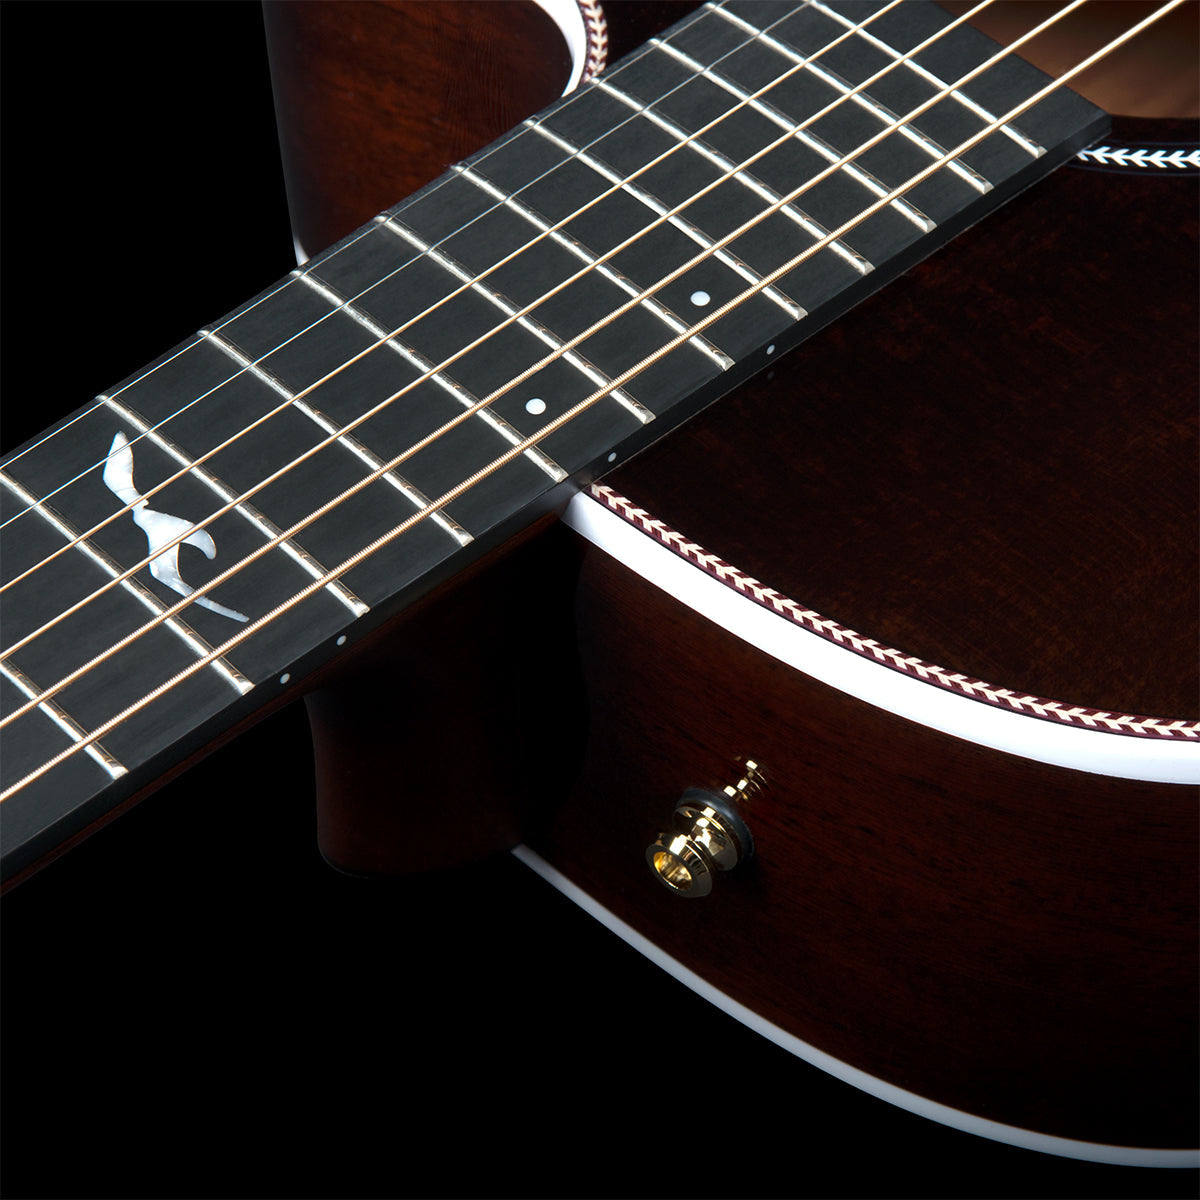 Seagull Artist Peppino Signature C/A Electro-Acoustic Guitar ~ Bourbon Burst with Bag,  for sale at Richards Guitars.